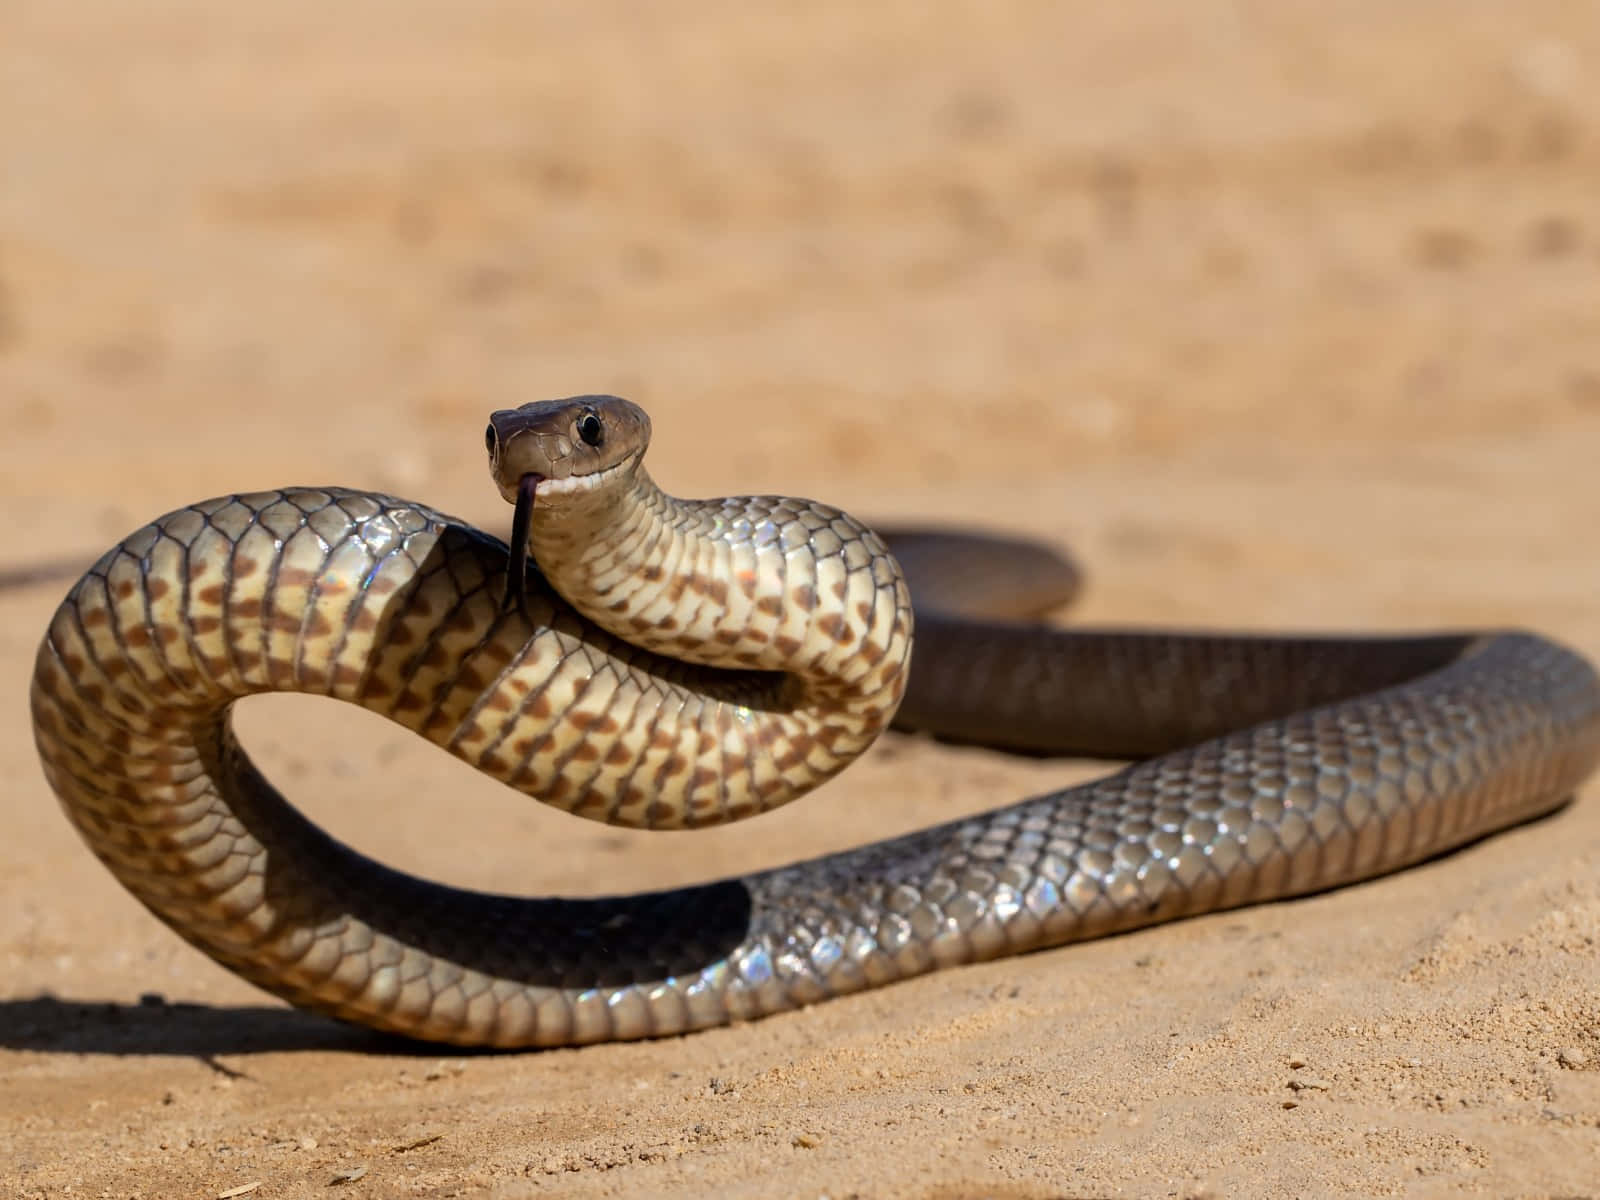 A close-up of an elegant brown snake in its natural habitat Wallpaper